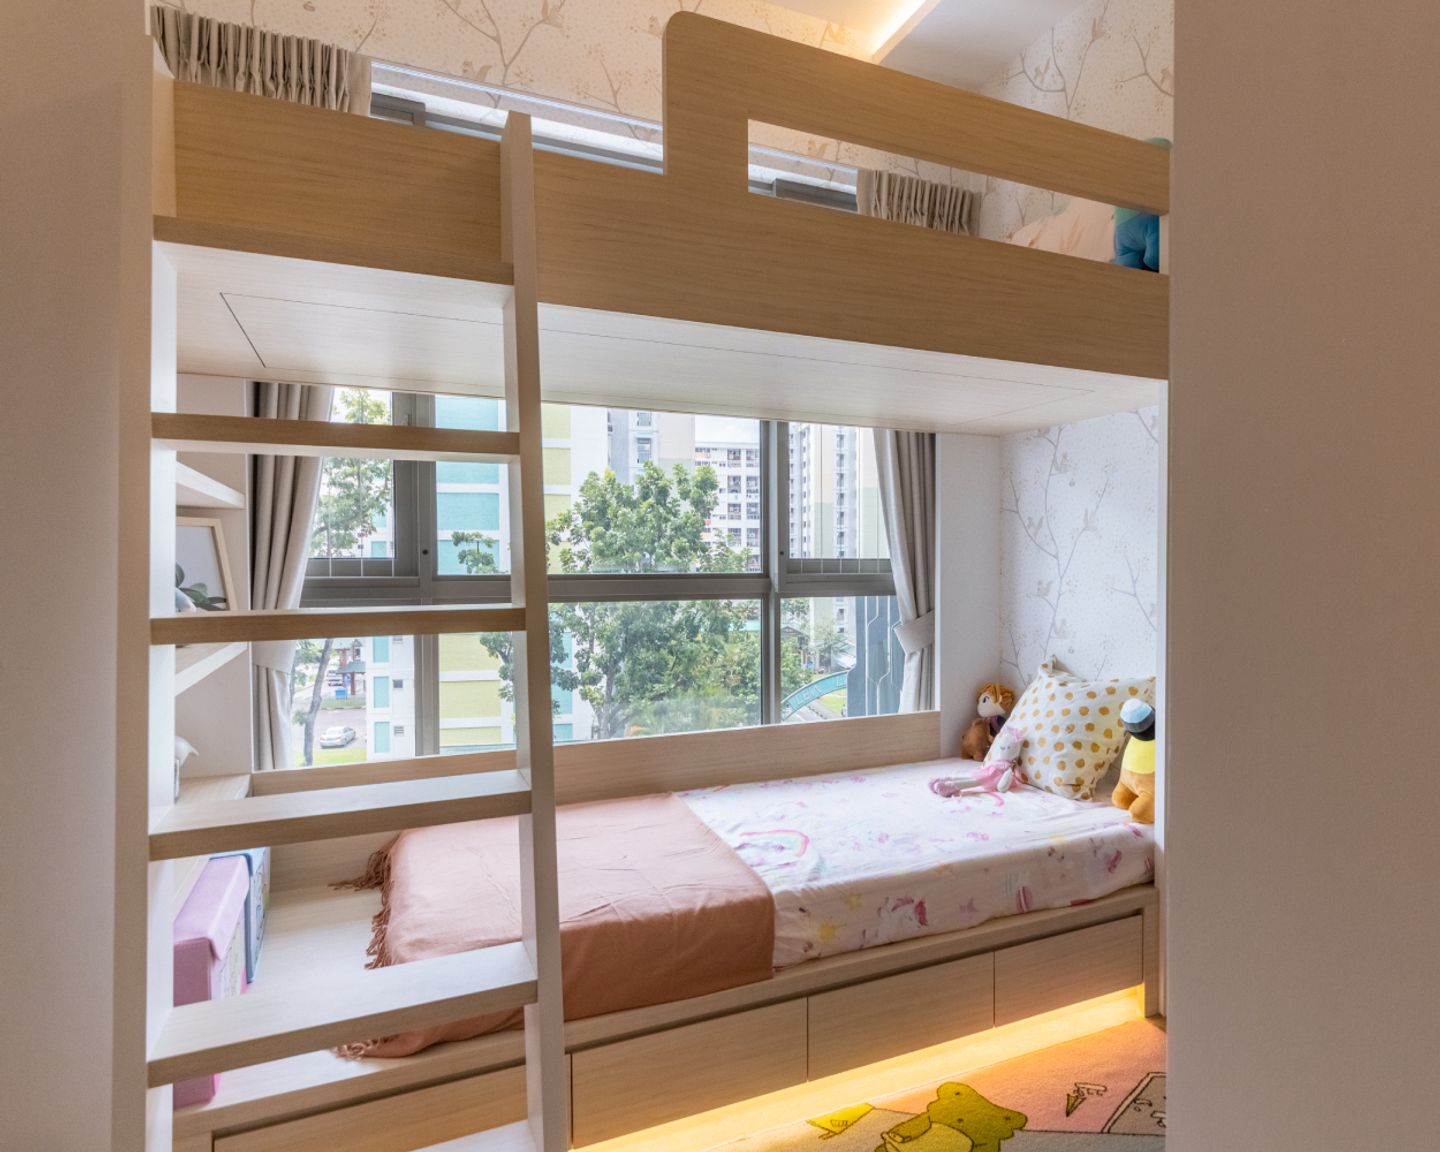 Minimalist Design With Wooden Bunk Bed For A Two-Sharing Space - Livspace